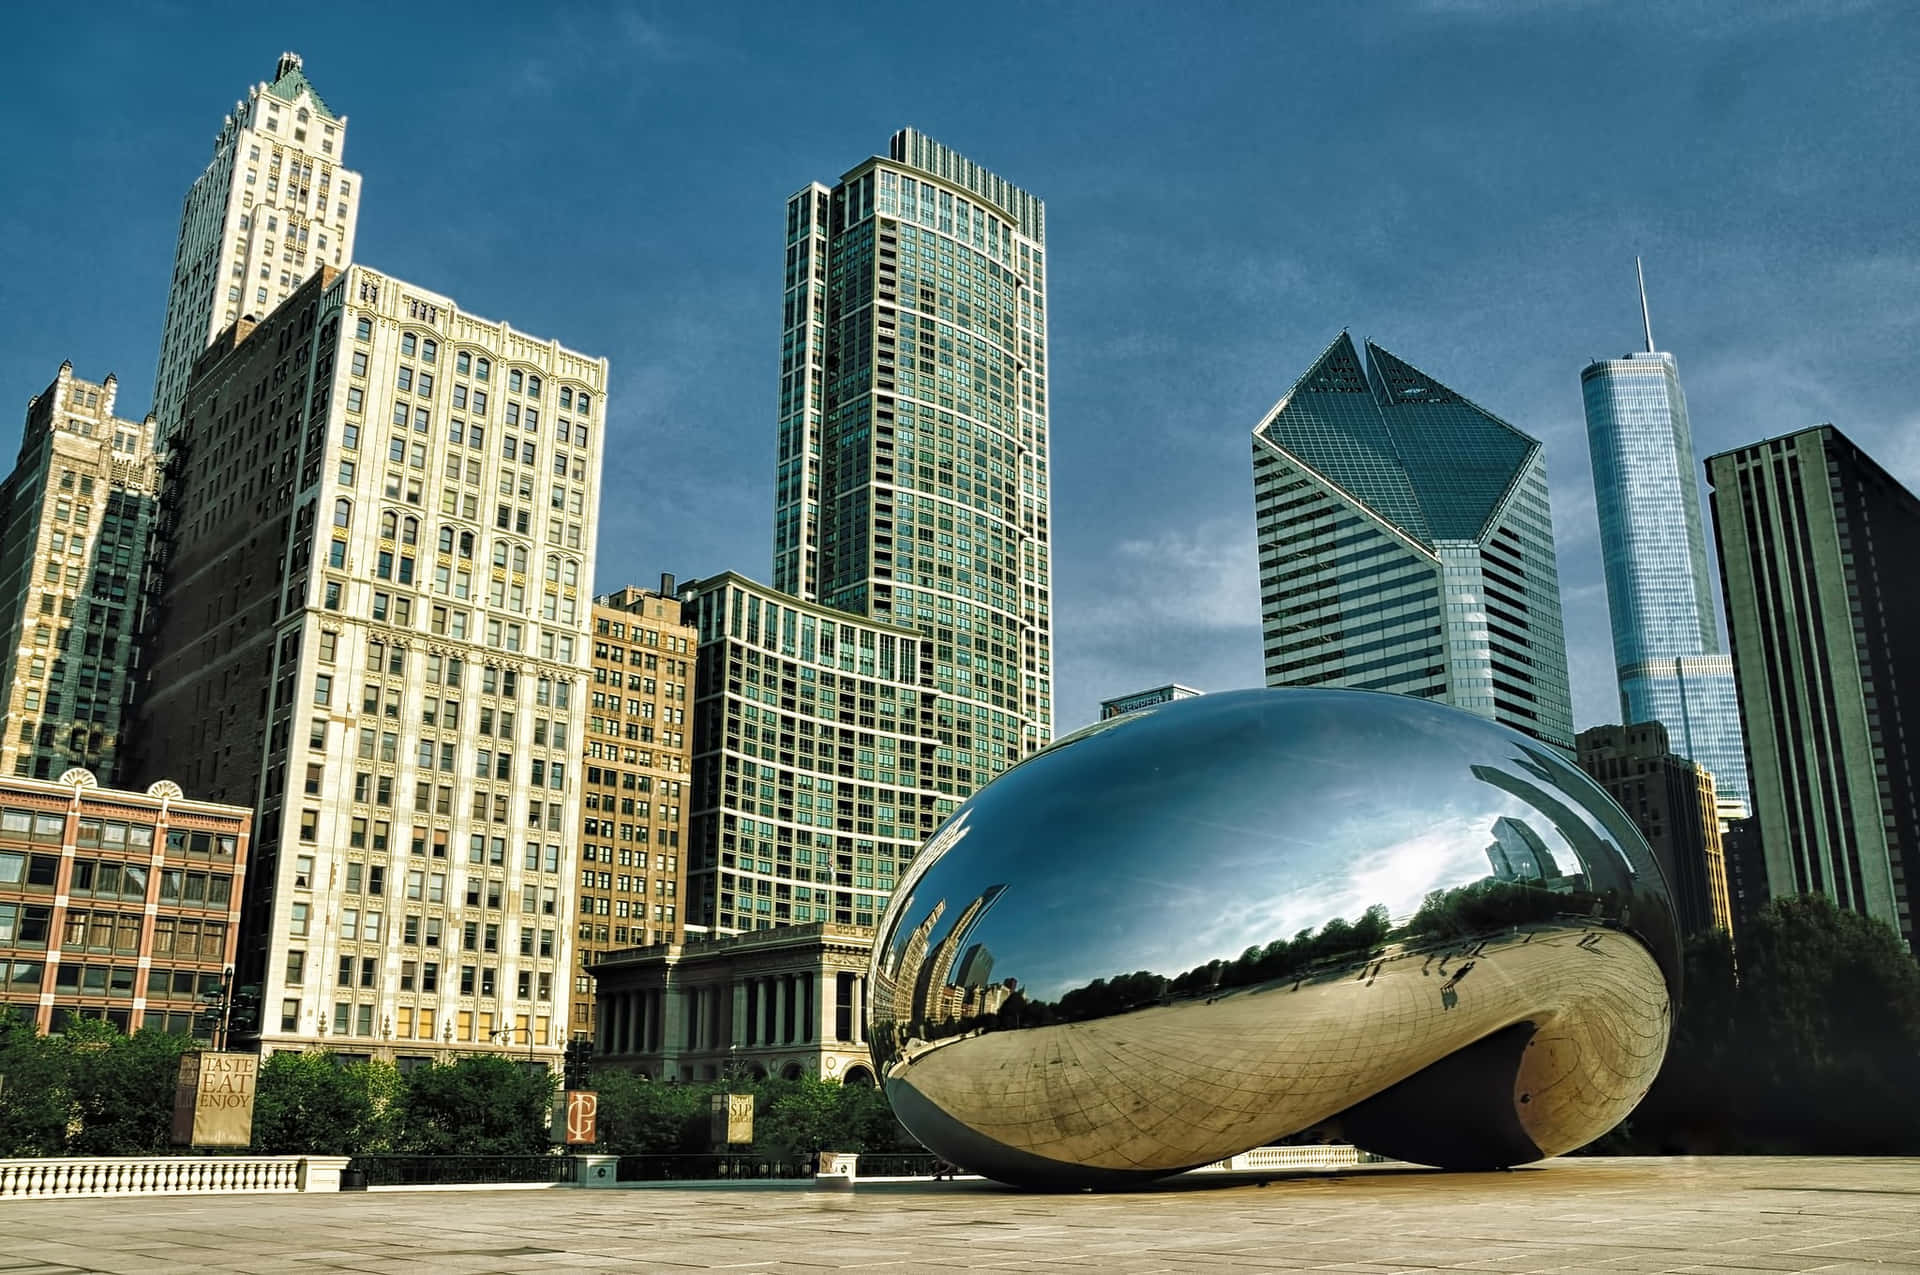 Cloud Gate Bean-shaped Structure In Chicago Picture